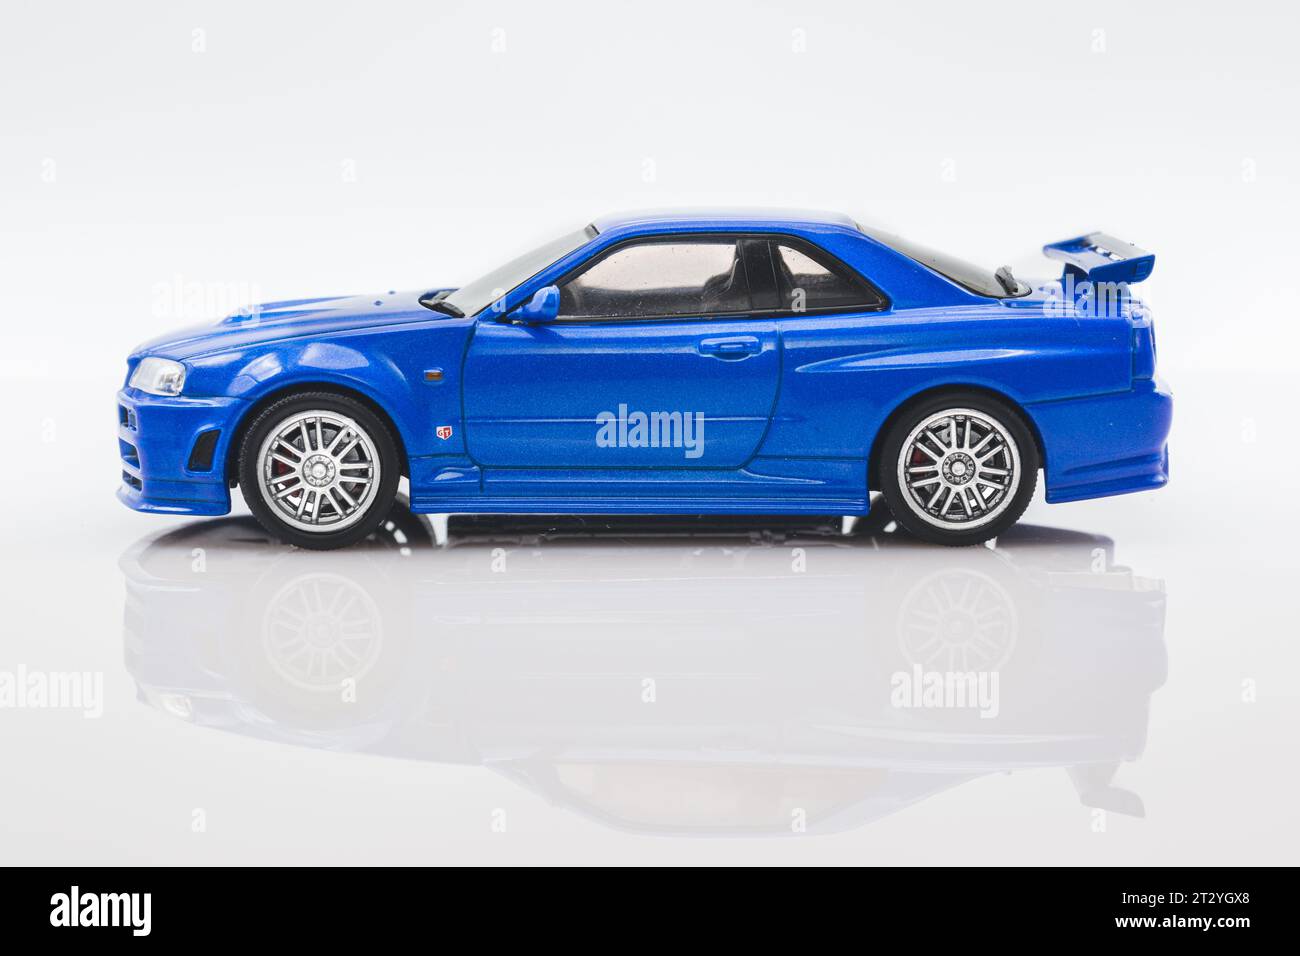 Nissan skyline automobile model hi-res stock photography and images - Alamy